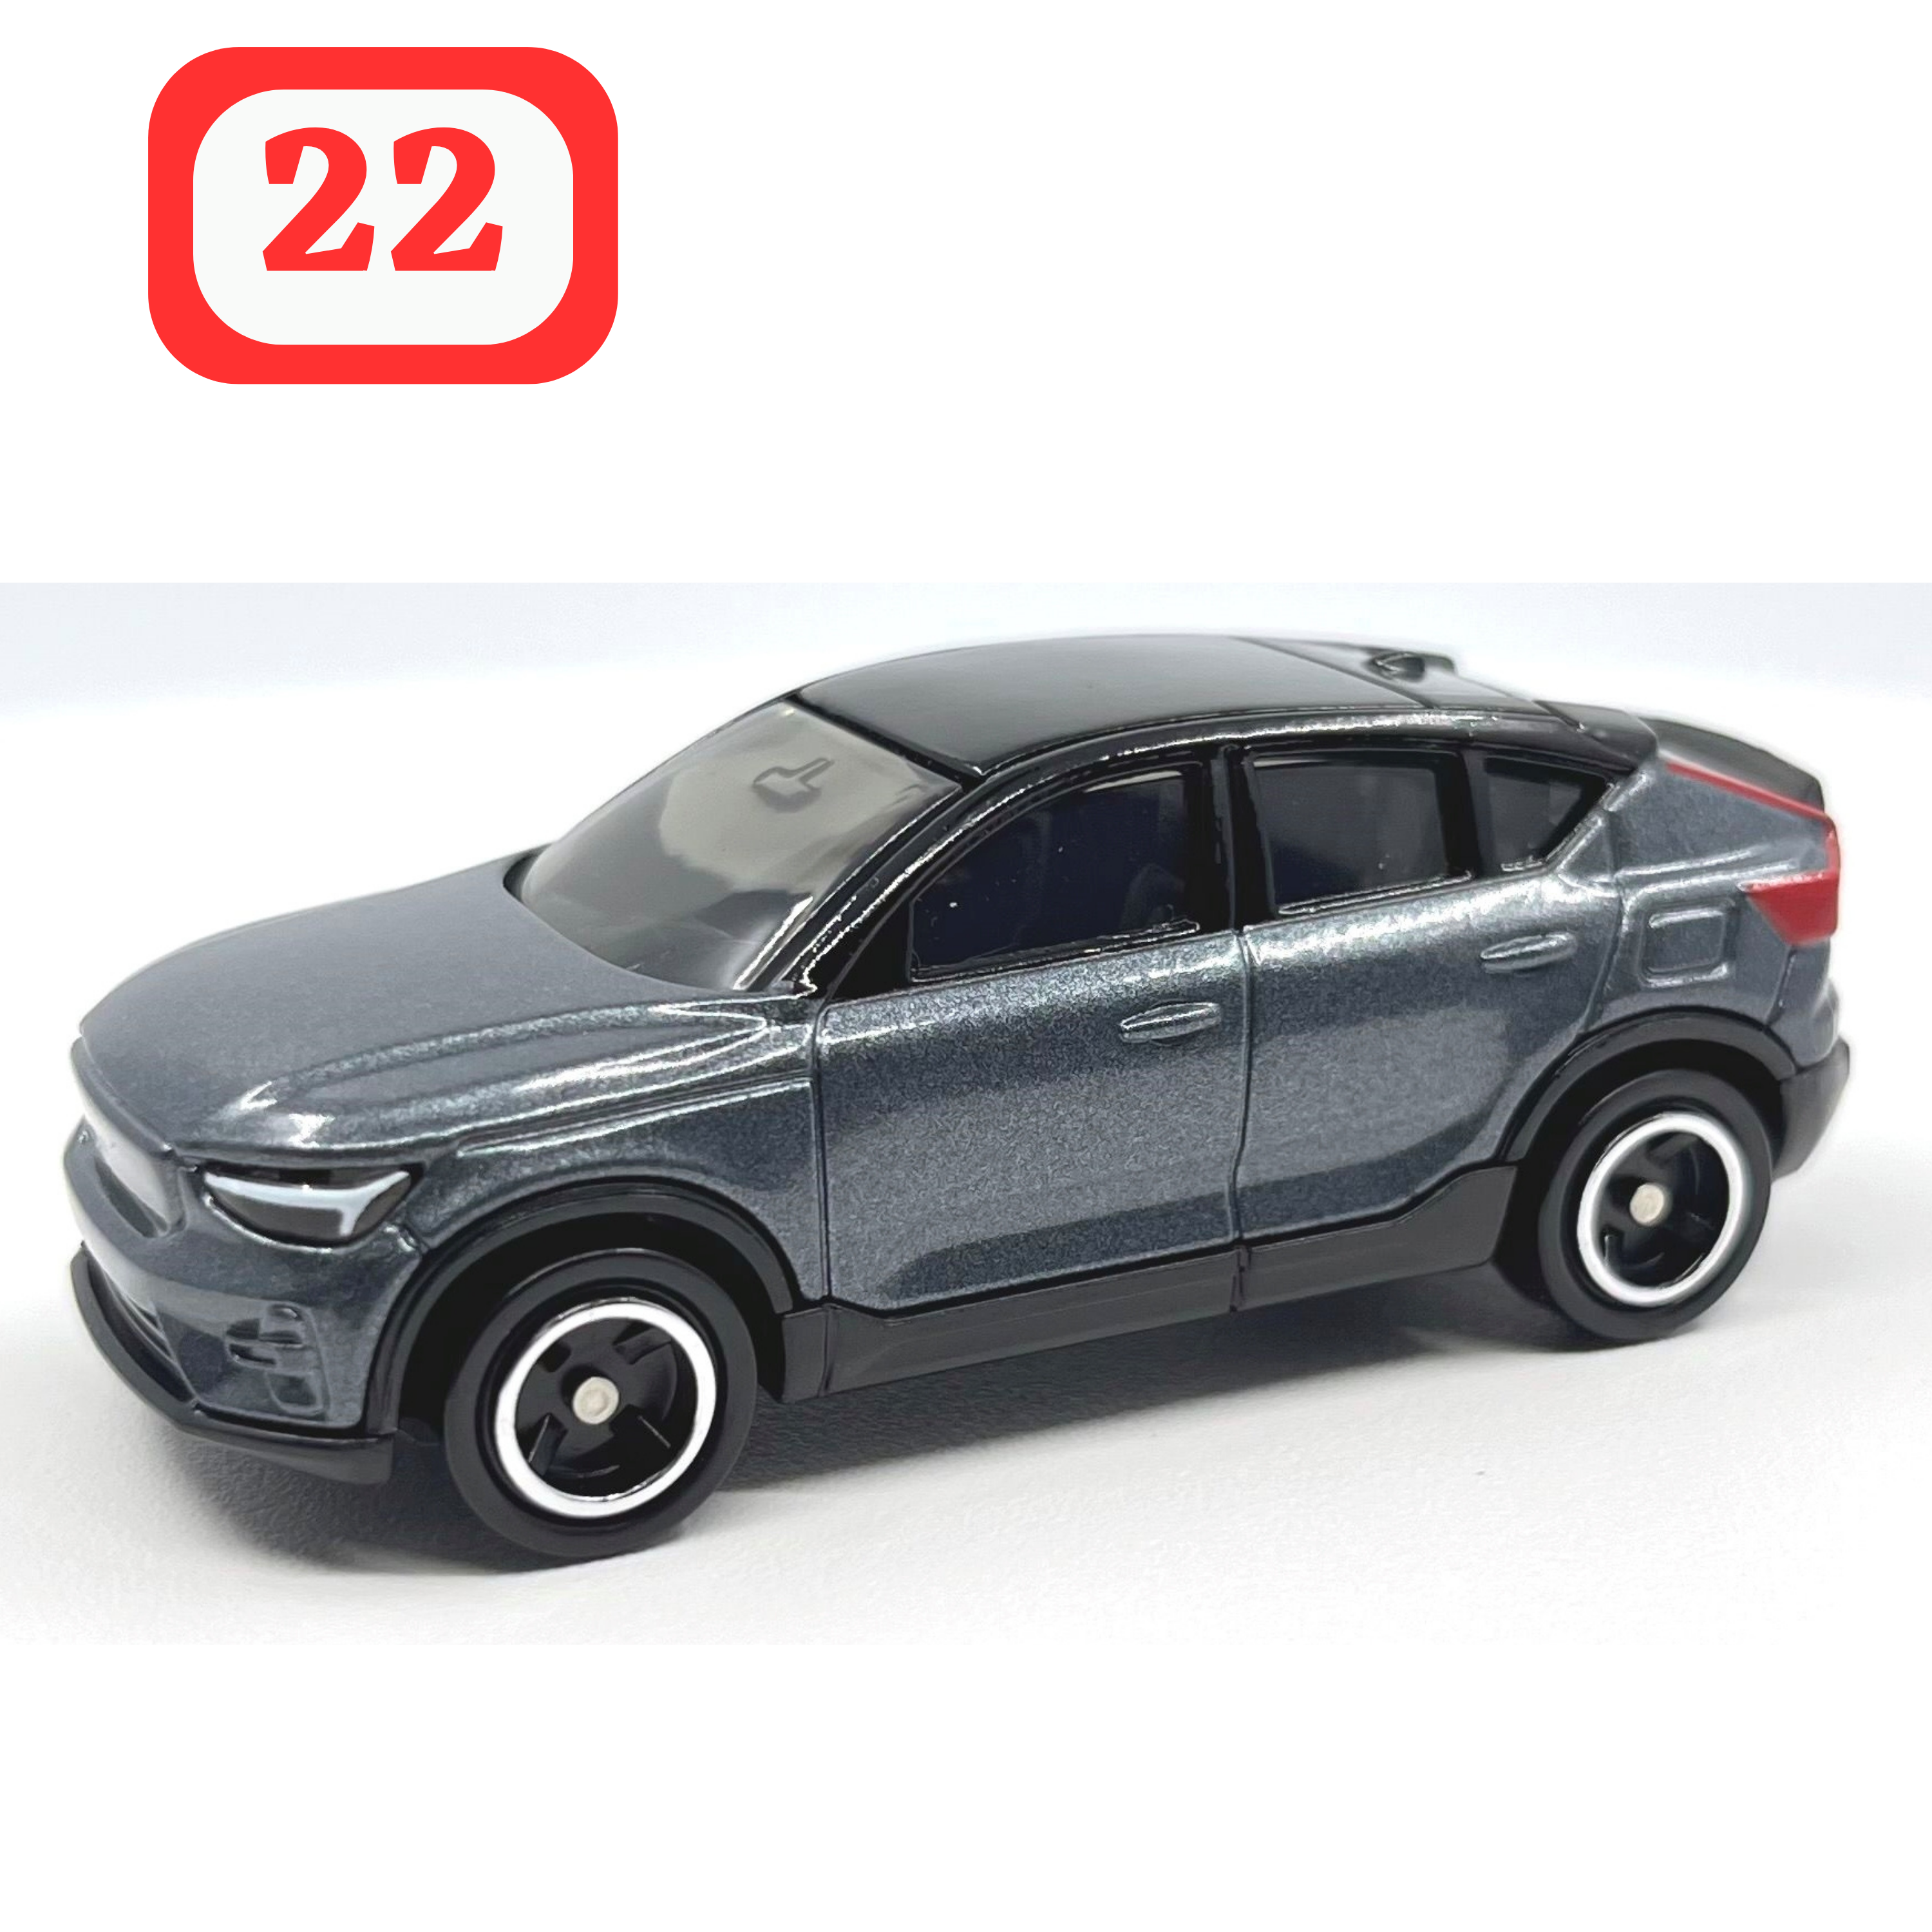 1:63 Volvo C40 Recharge Alloy Tomica Diecast Car Model by Takara Tomy